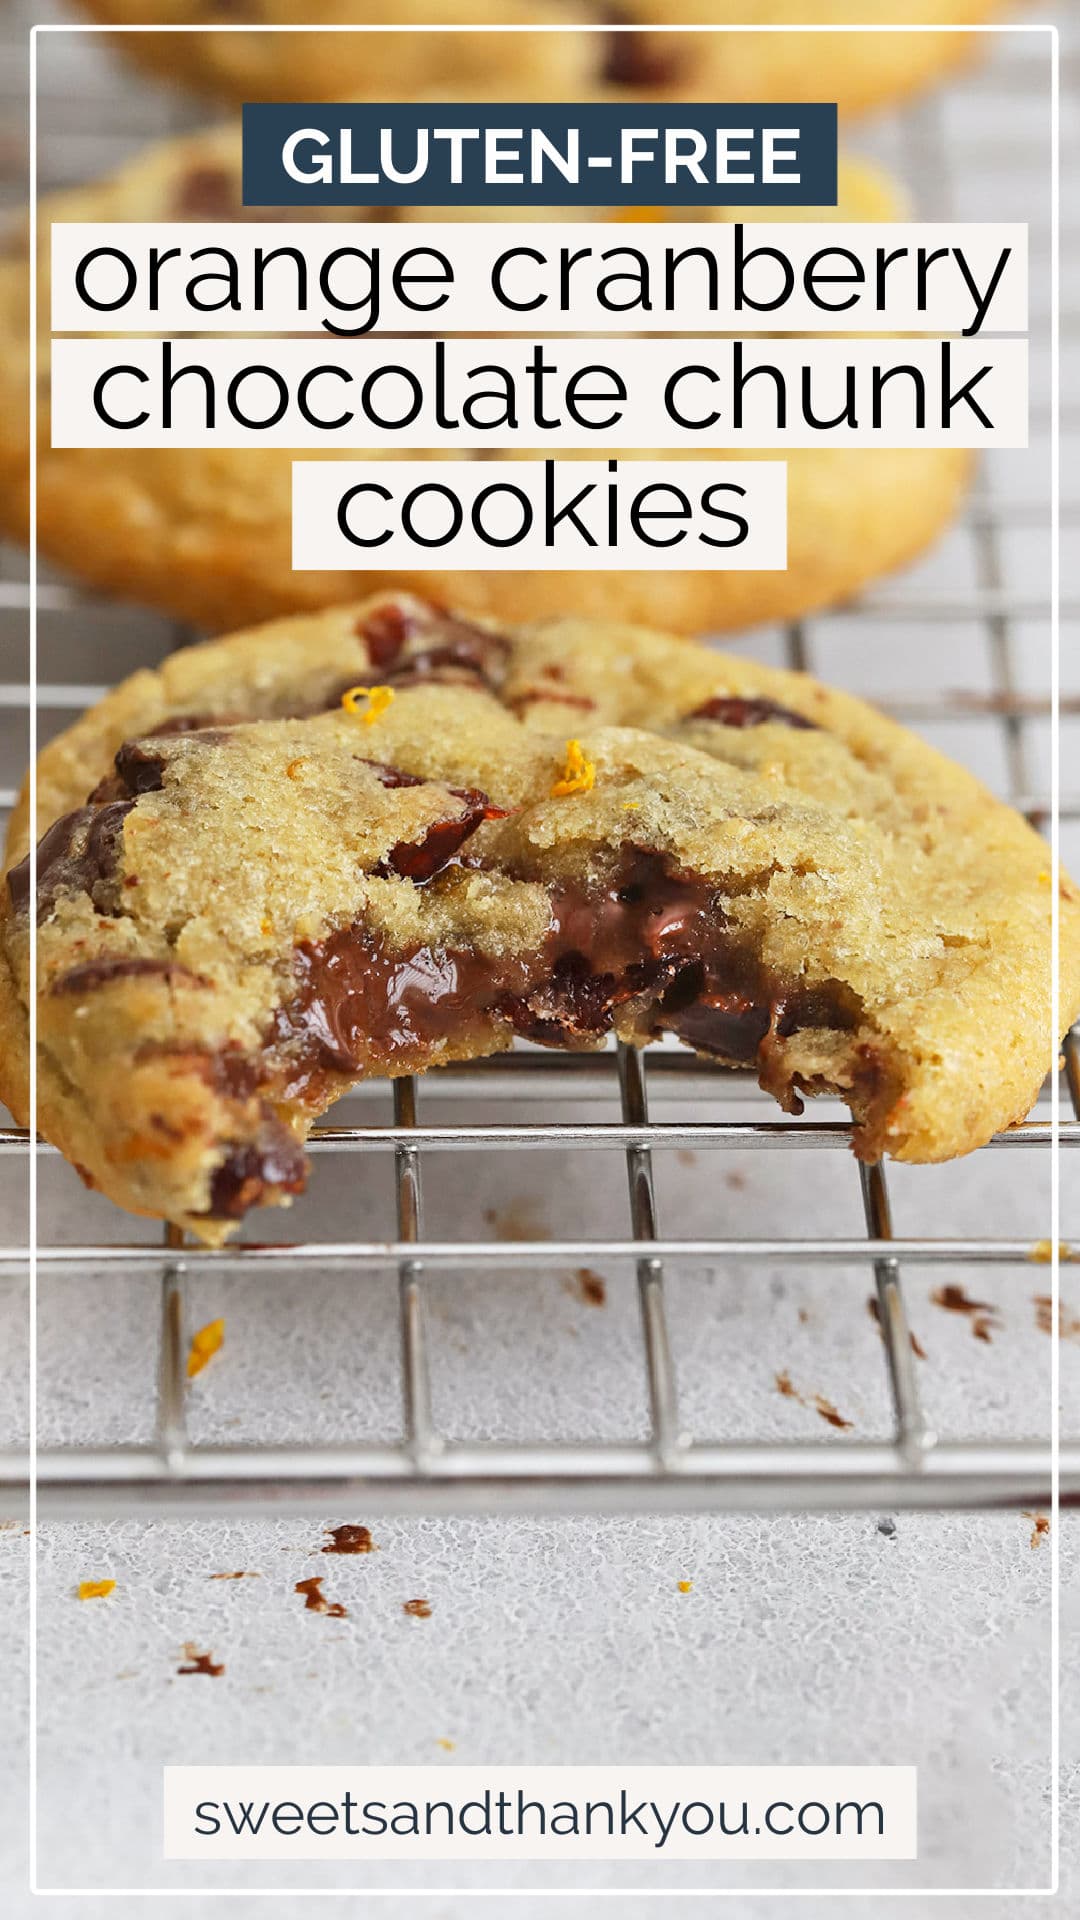 Gluten-Free Orange Cranberry Chocolate Chunk Cookies - These orange cranberry cookies have plenty of chocolate in every bite. They're a perfect gluten-free holiday cookie! // Gluten-Free Cranberry Chocolate Chip Cookies // Gluten-Free Christmas Cookies // Orange Chocolate Chip Cookies // Orange Cranberry Cookies // Gluten Free Chocolate Chunk Cookies